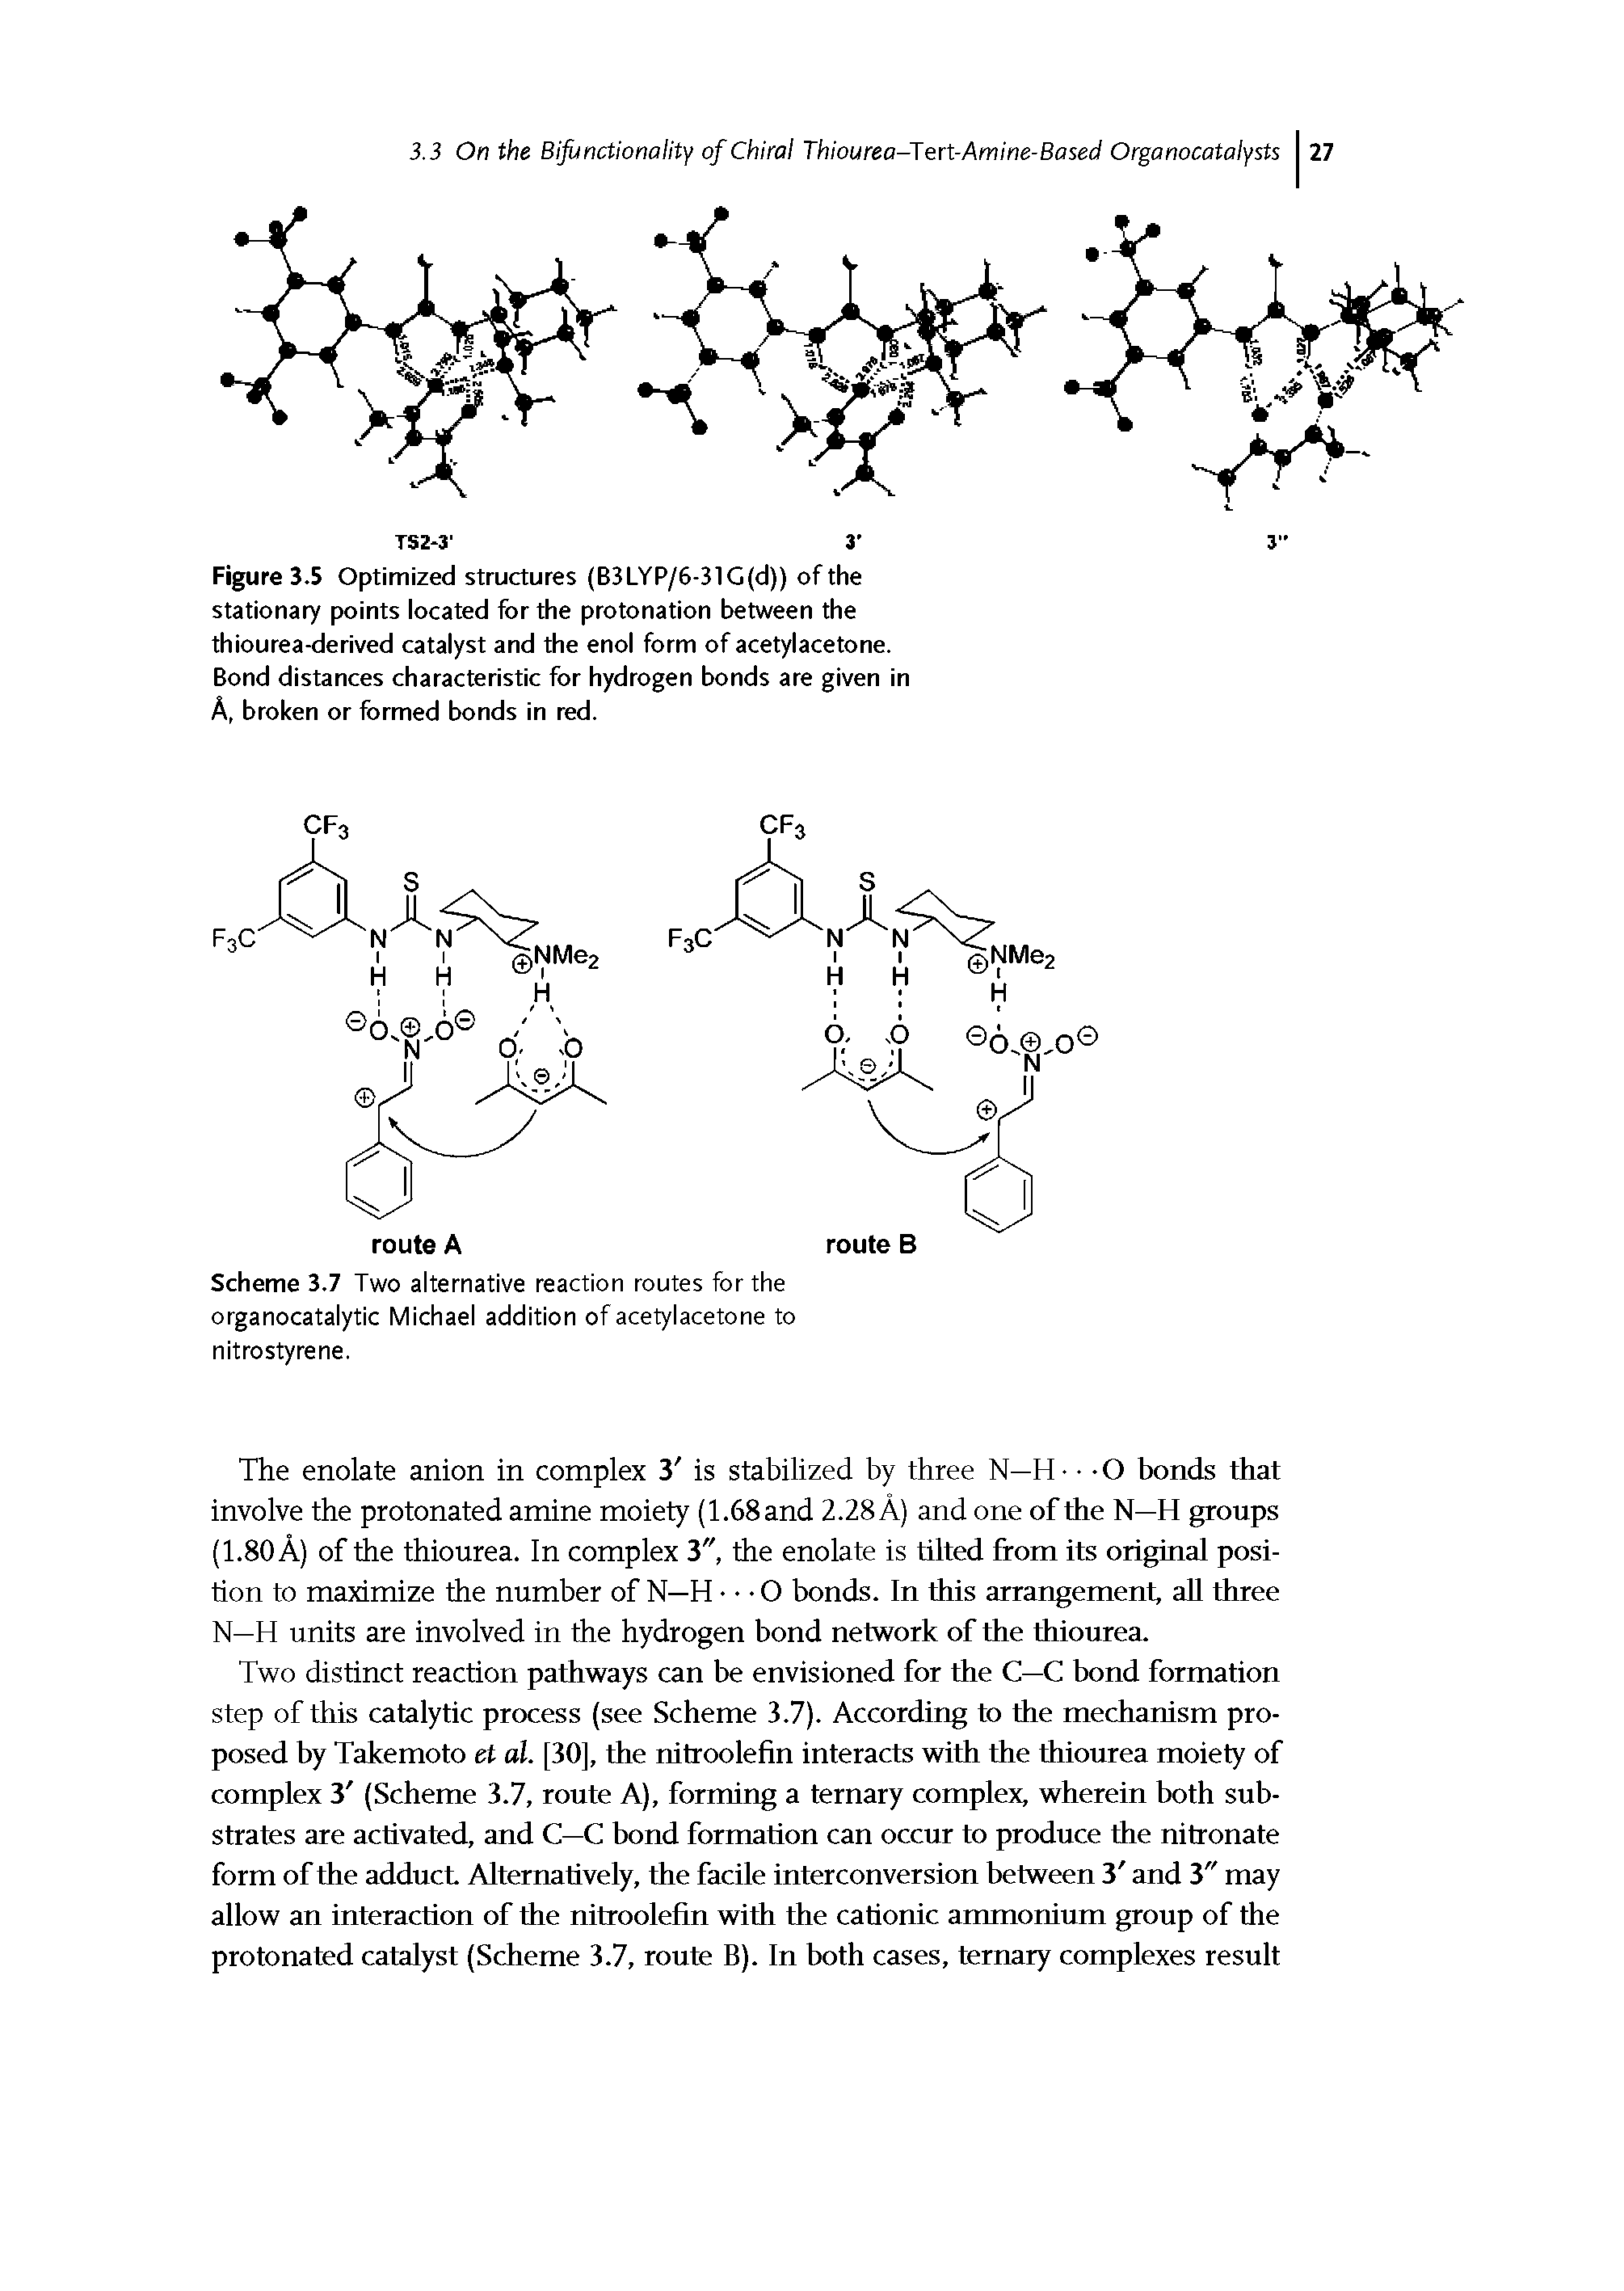 Scheme 3.7 Two alternative reaction routes for the organocatalytic Michael addition of acetylacetone to nitro styrene.